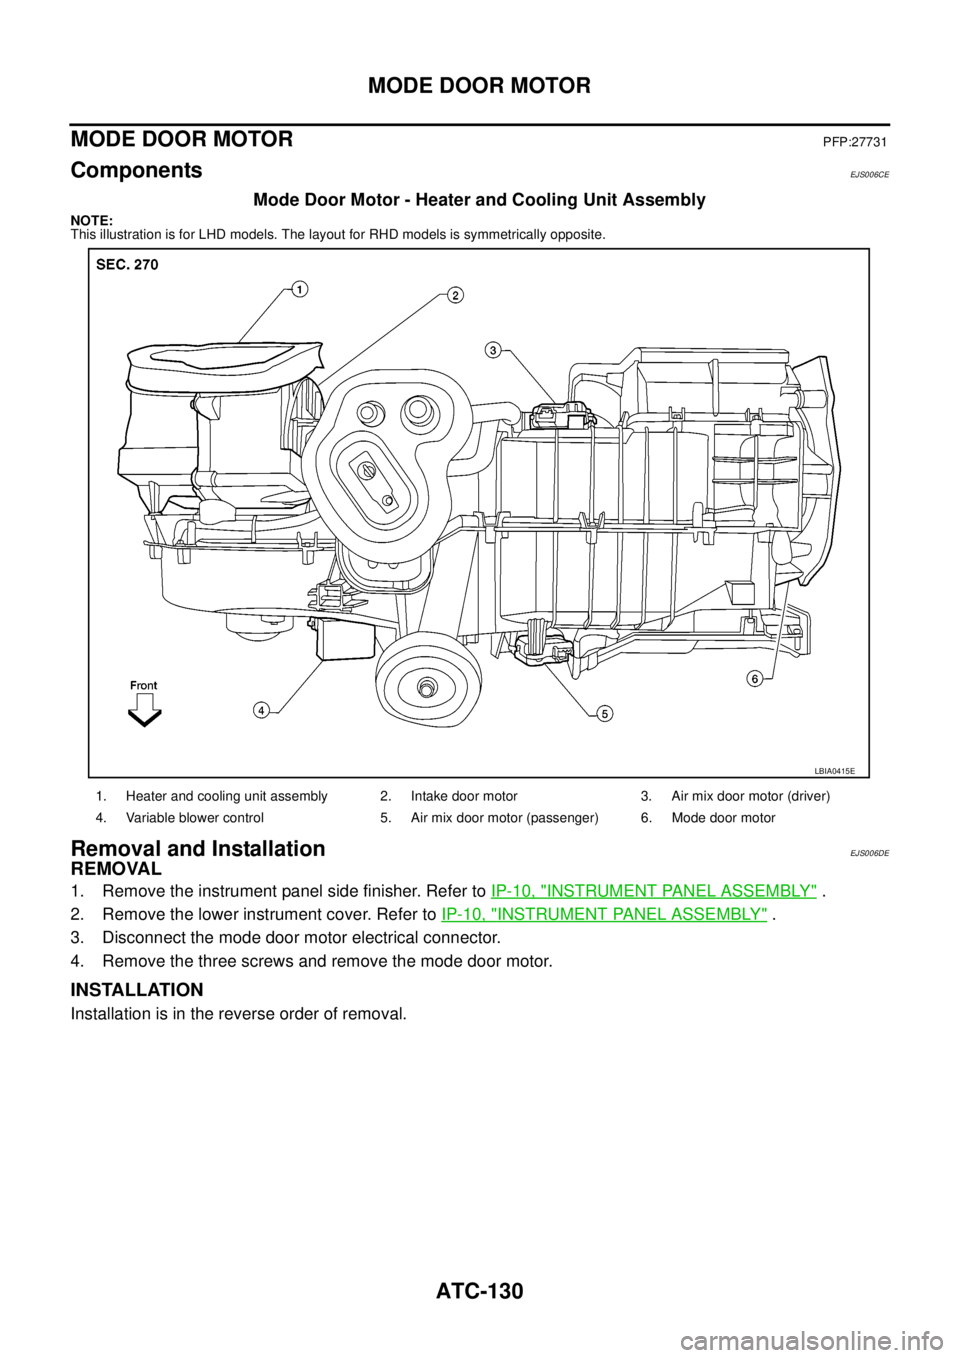 NISSAN NAVARA 2005  Repair Workshop Manual ATC-130
MODE DOOR MOTOR
MODE DOOR MOTOR
PFP:27731
ComponentsEJS006CE
Mode Door Motor - Heater and Cooling Unit Assembly
NOTE:
This illustration is for LHD models. The layout for RHD models is symmetri